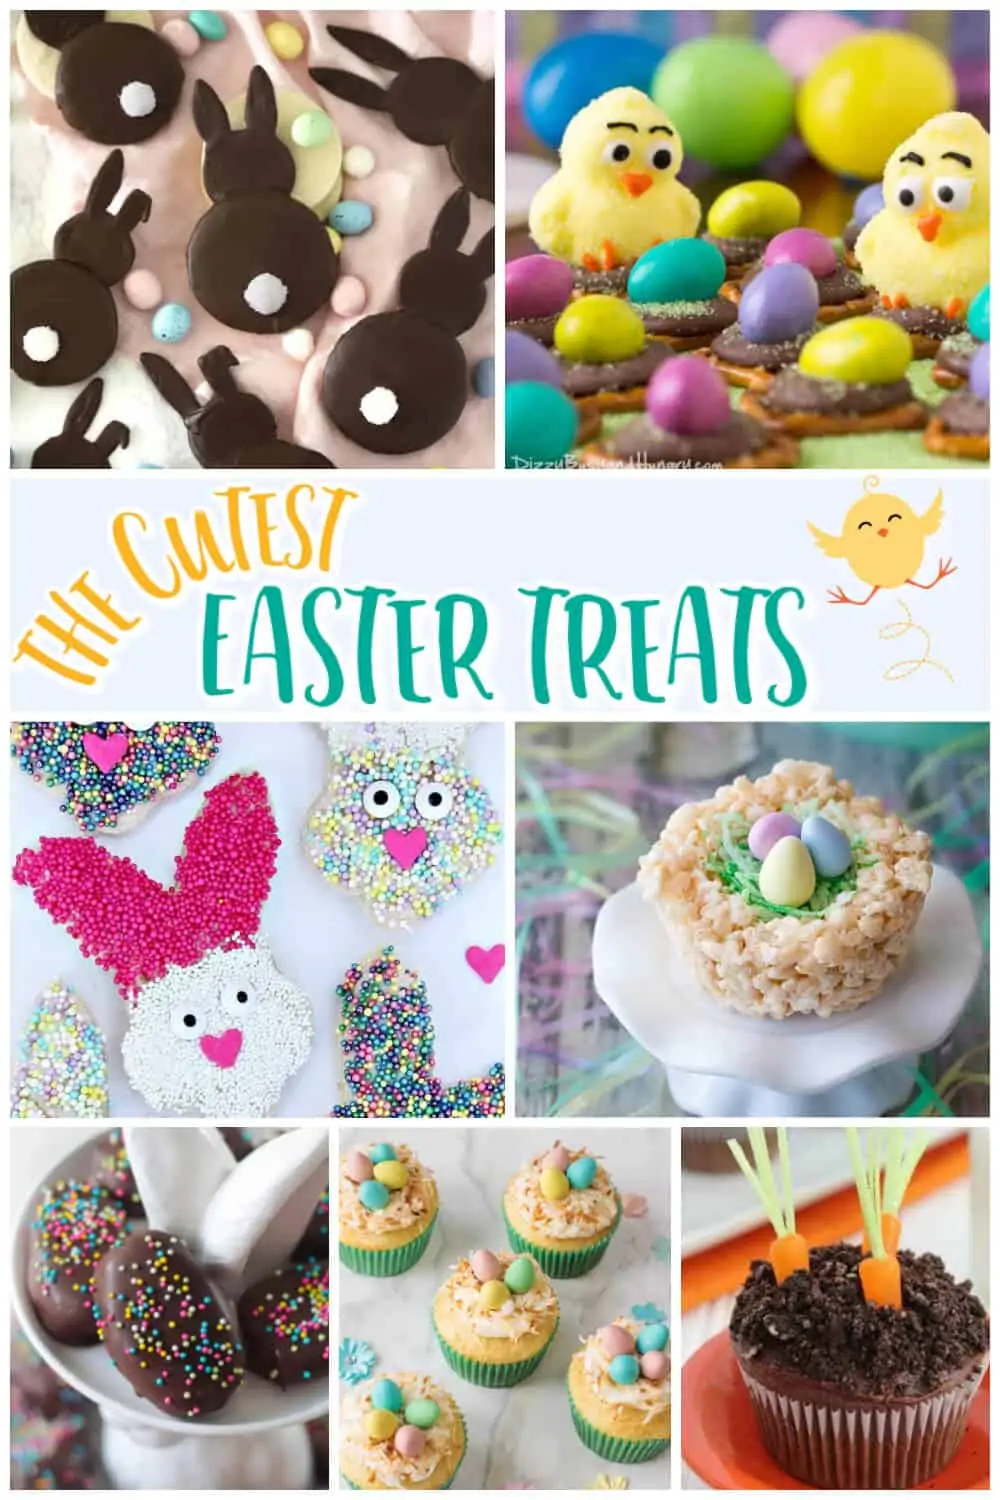 The Cutest Easter Treats for Kids